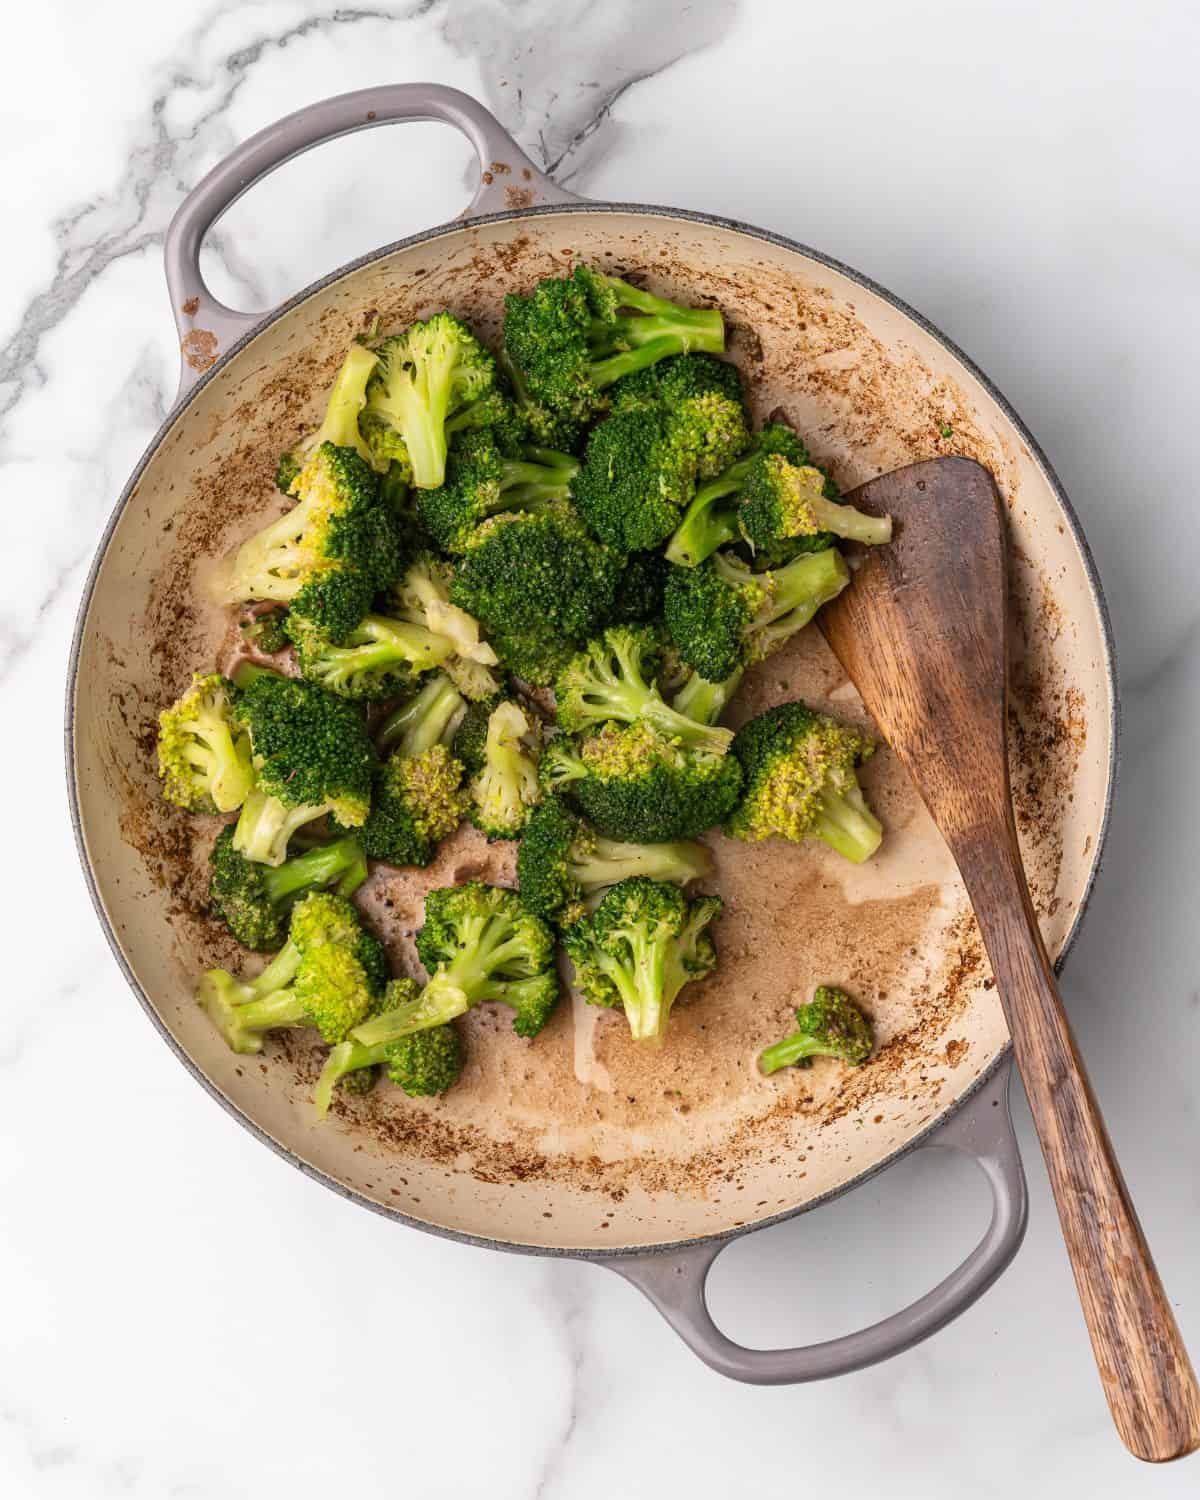 broccoli in a pot with a wooden spoon.